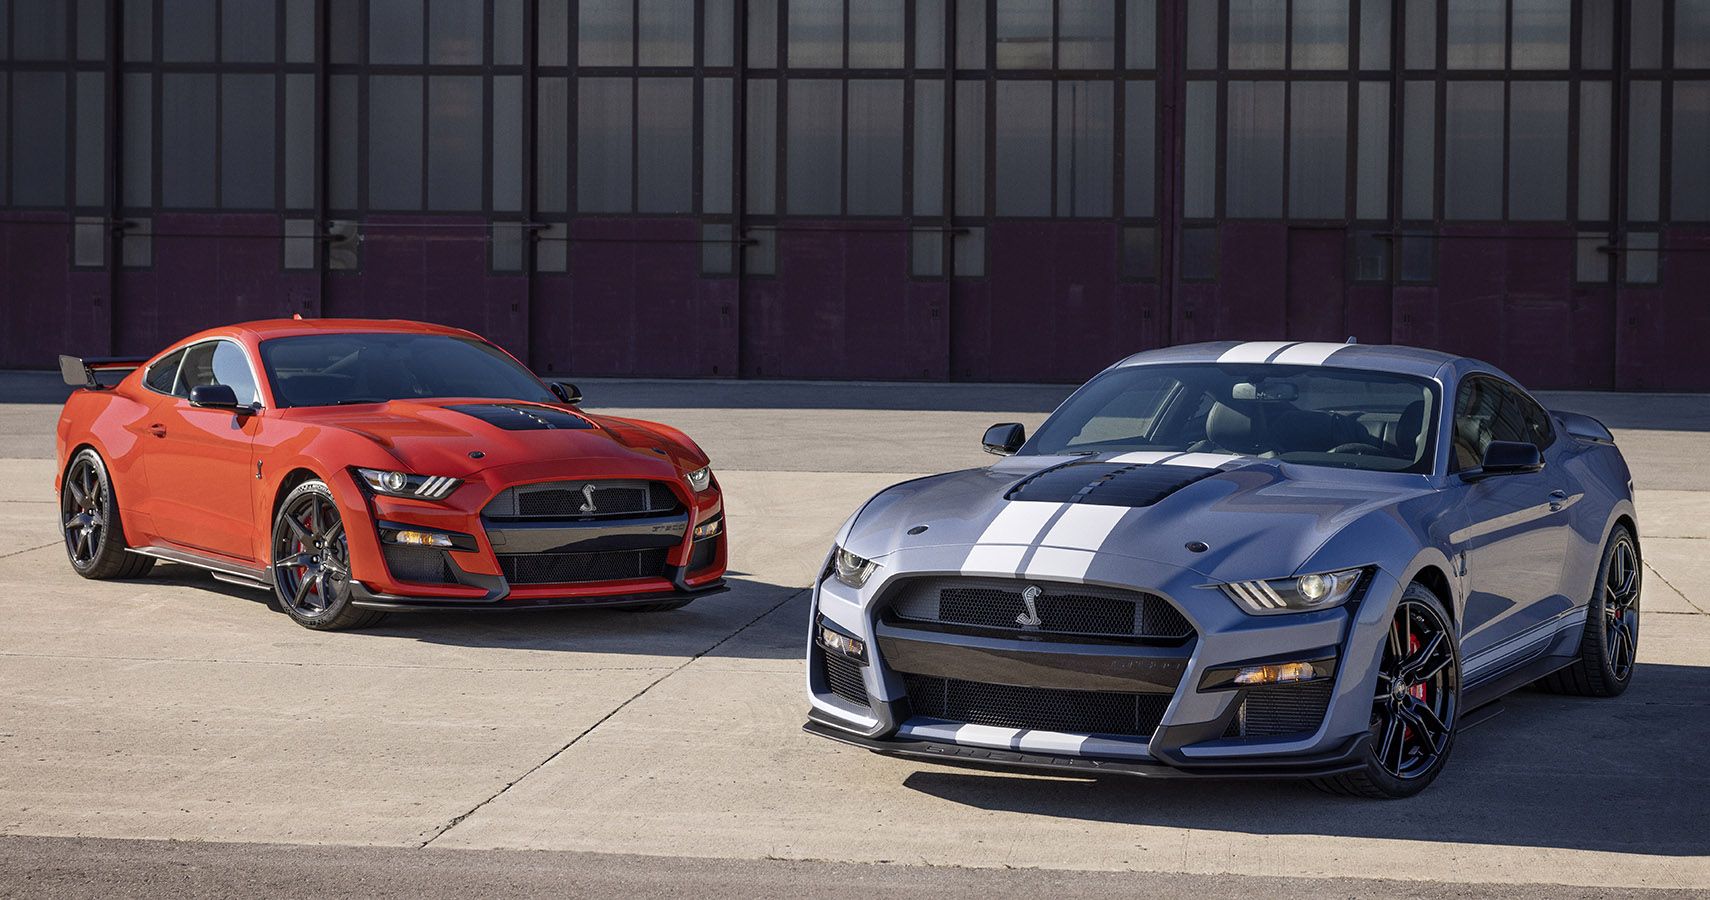 2022 Ford Mustang Shelby GT500 in red and Heritage in blue special models